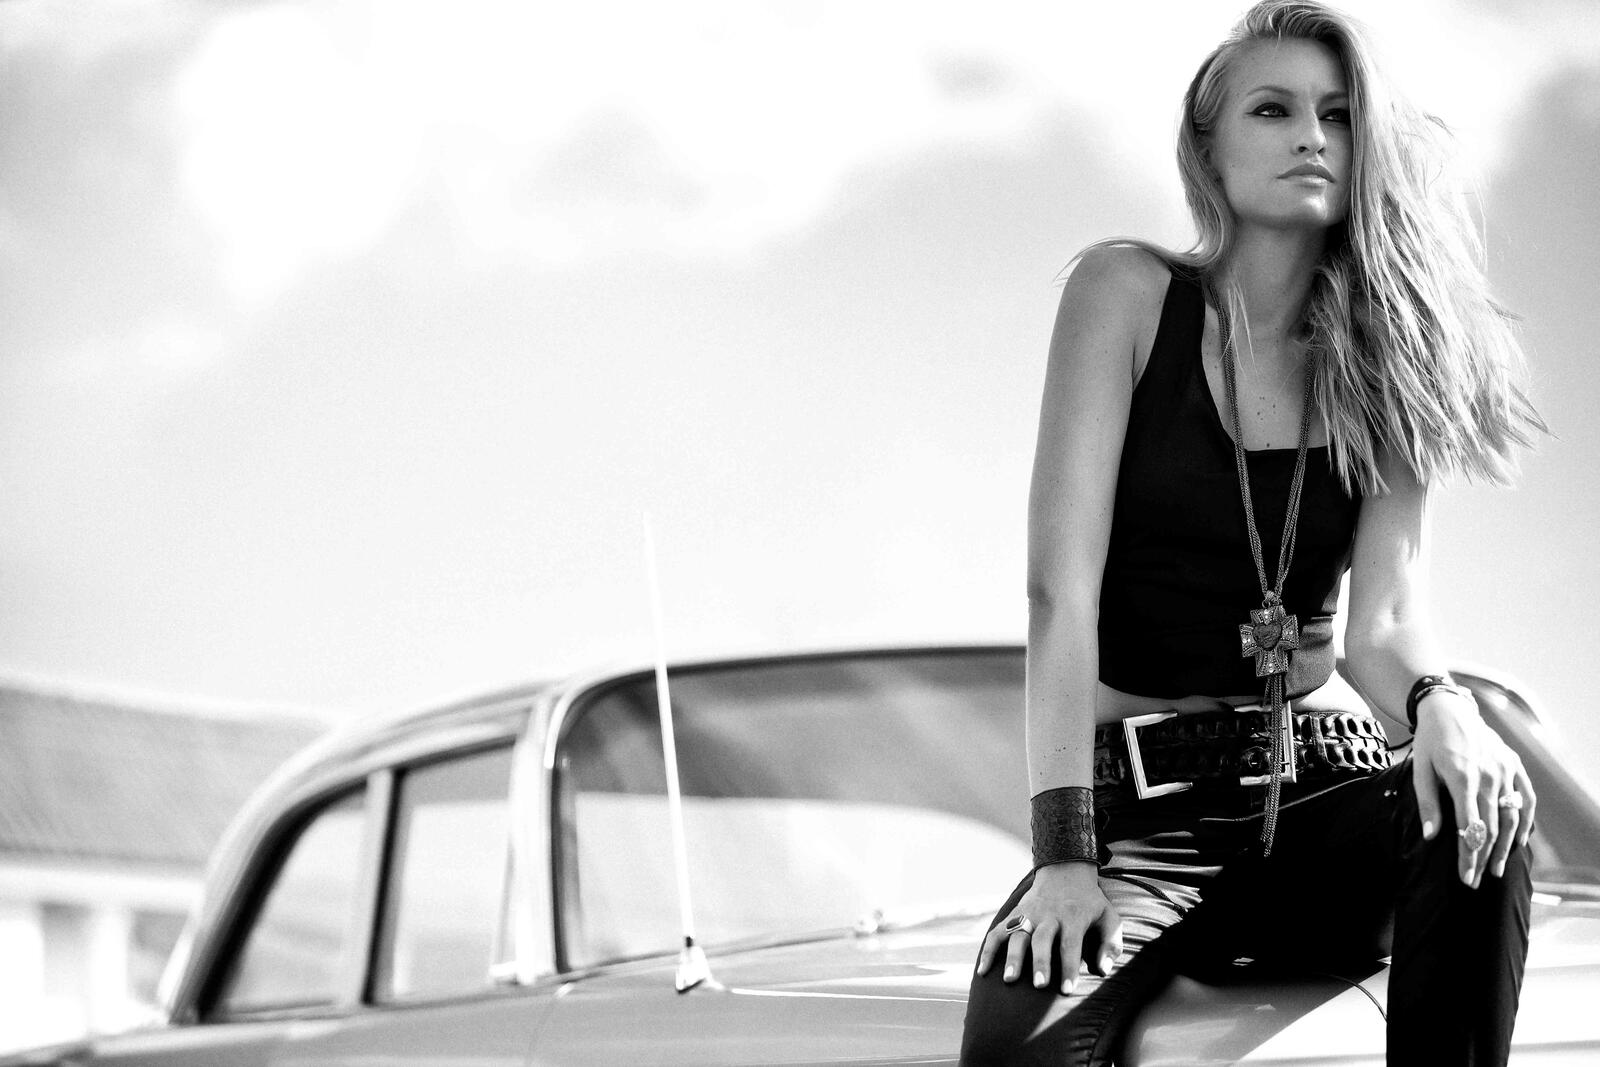 Free photo Victoria Alervall poses by a car in a black and white photo